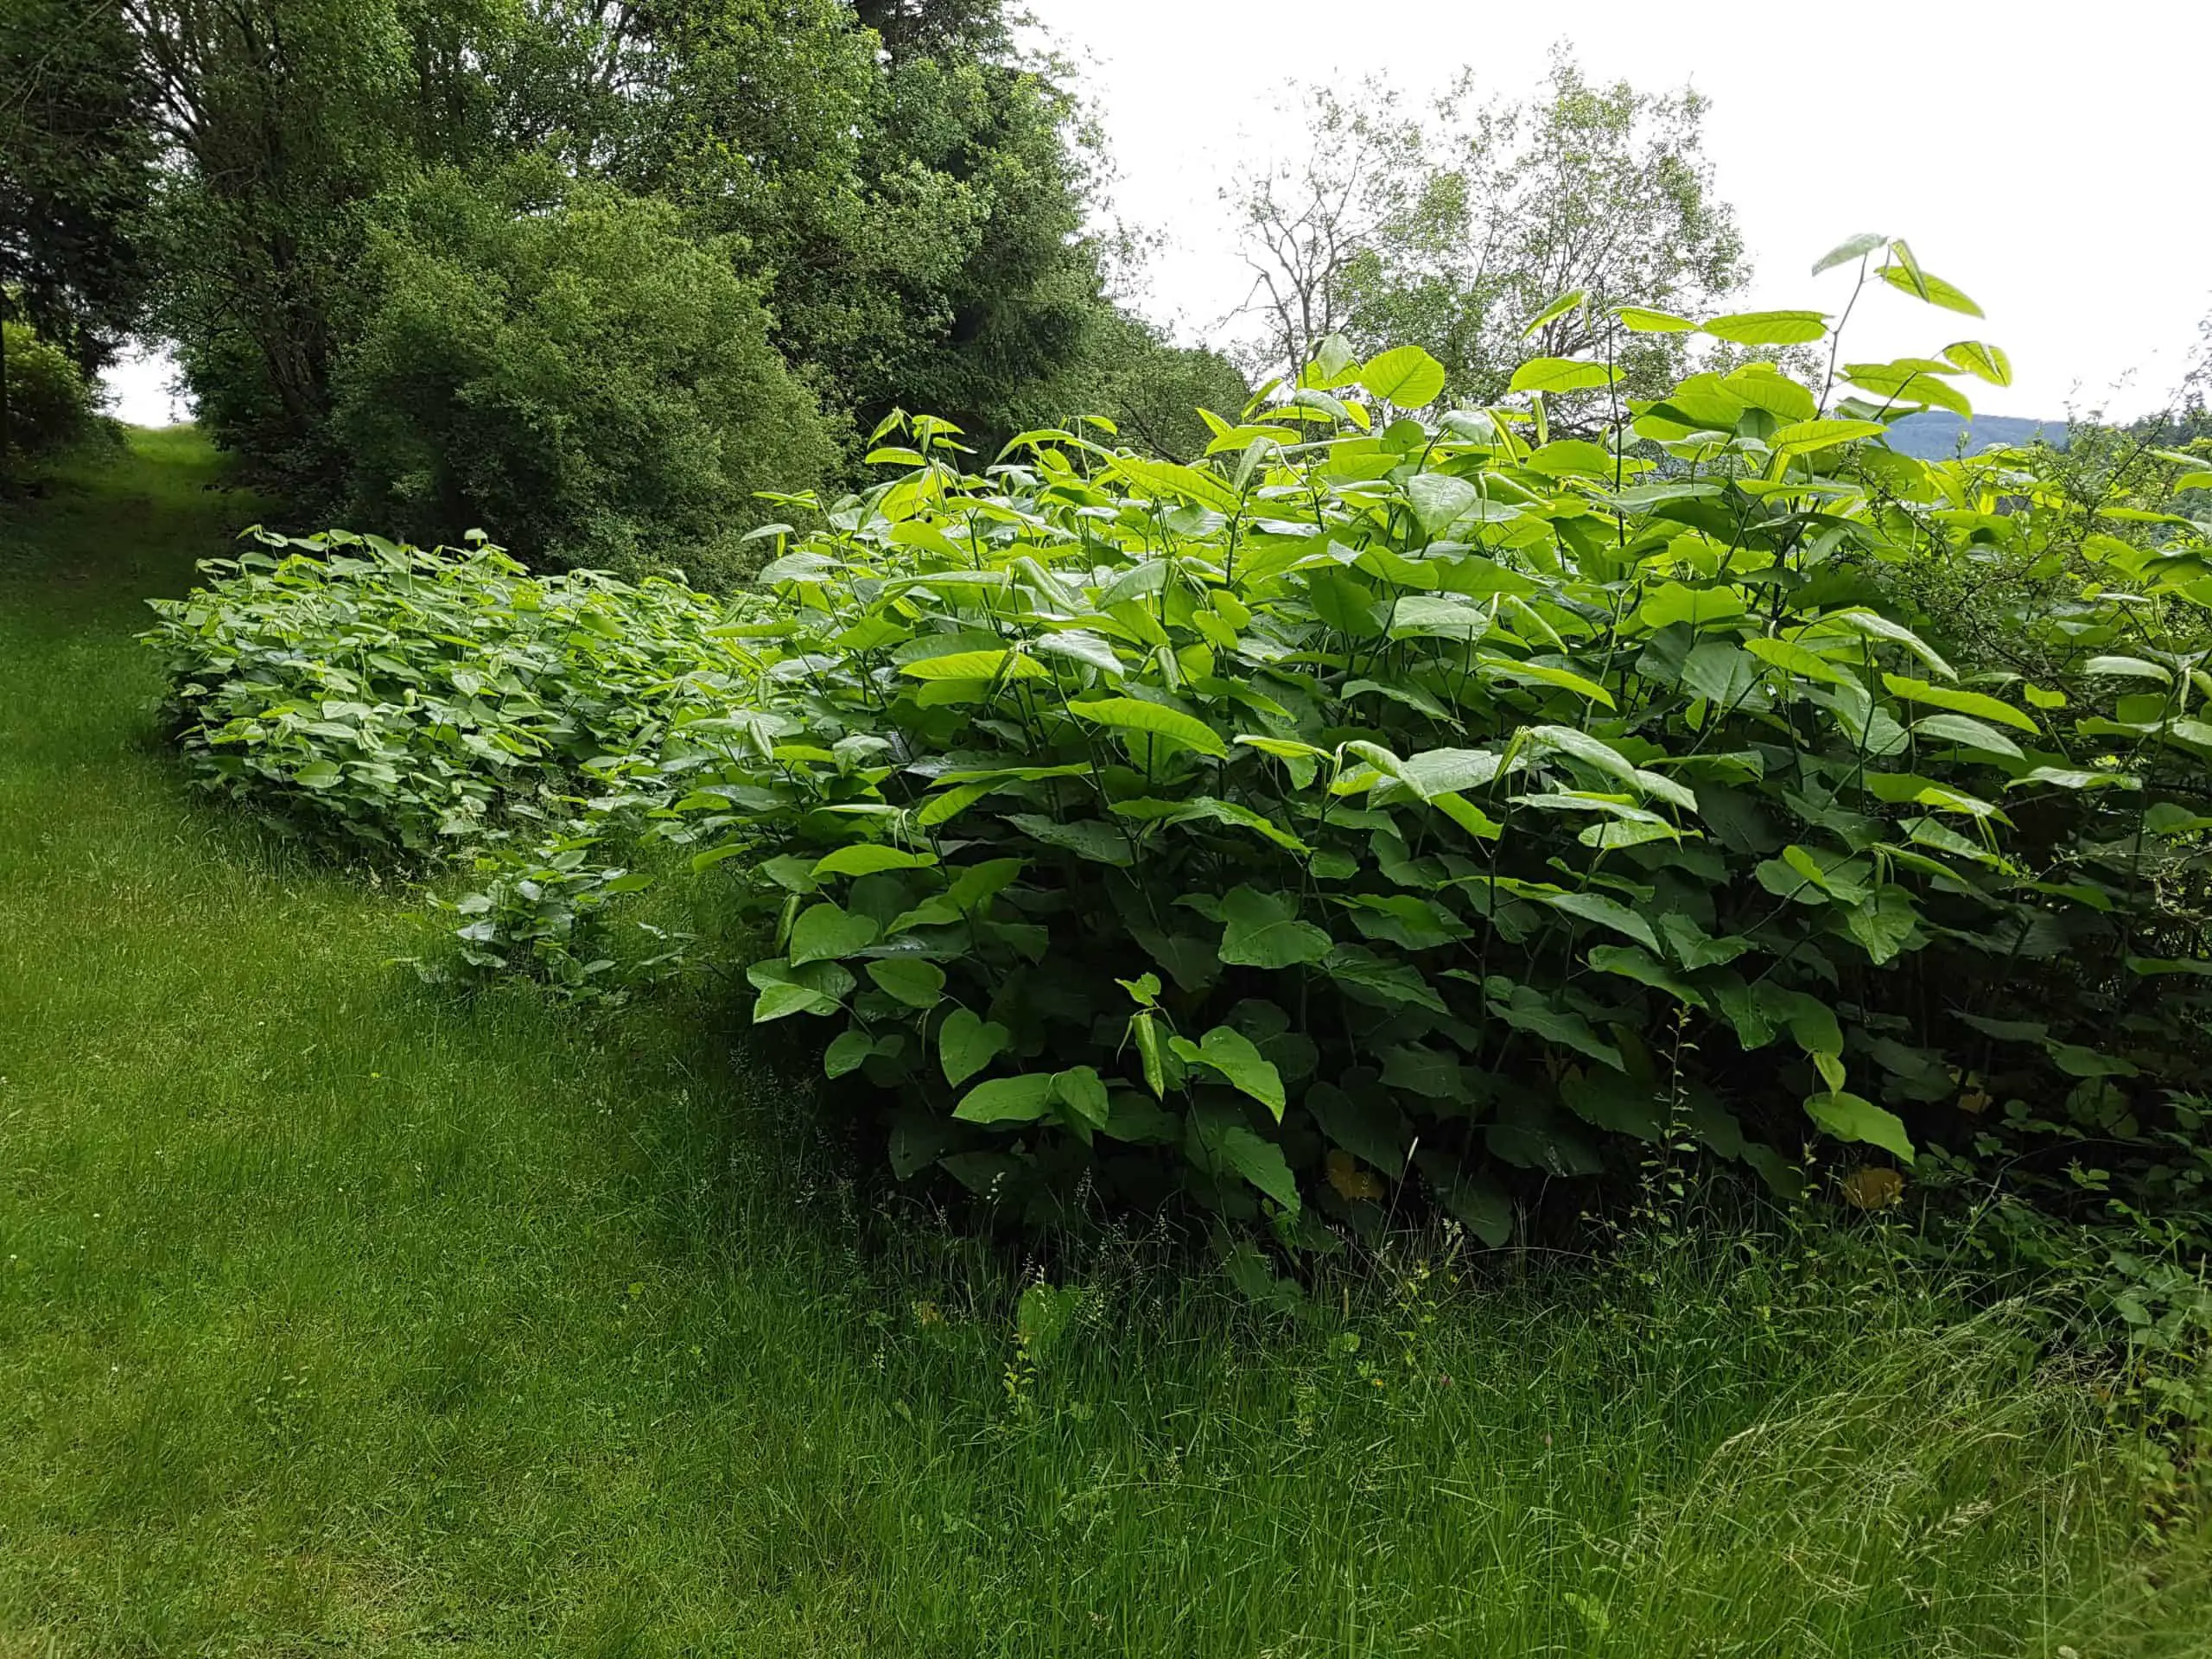 It is almost impossible to stop the spread of Japanese knotweed once it is on your property without a proper treatment plan